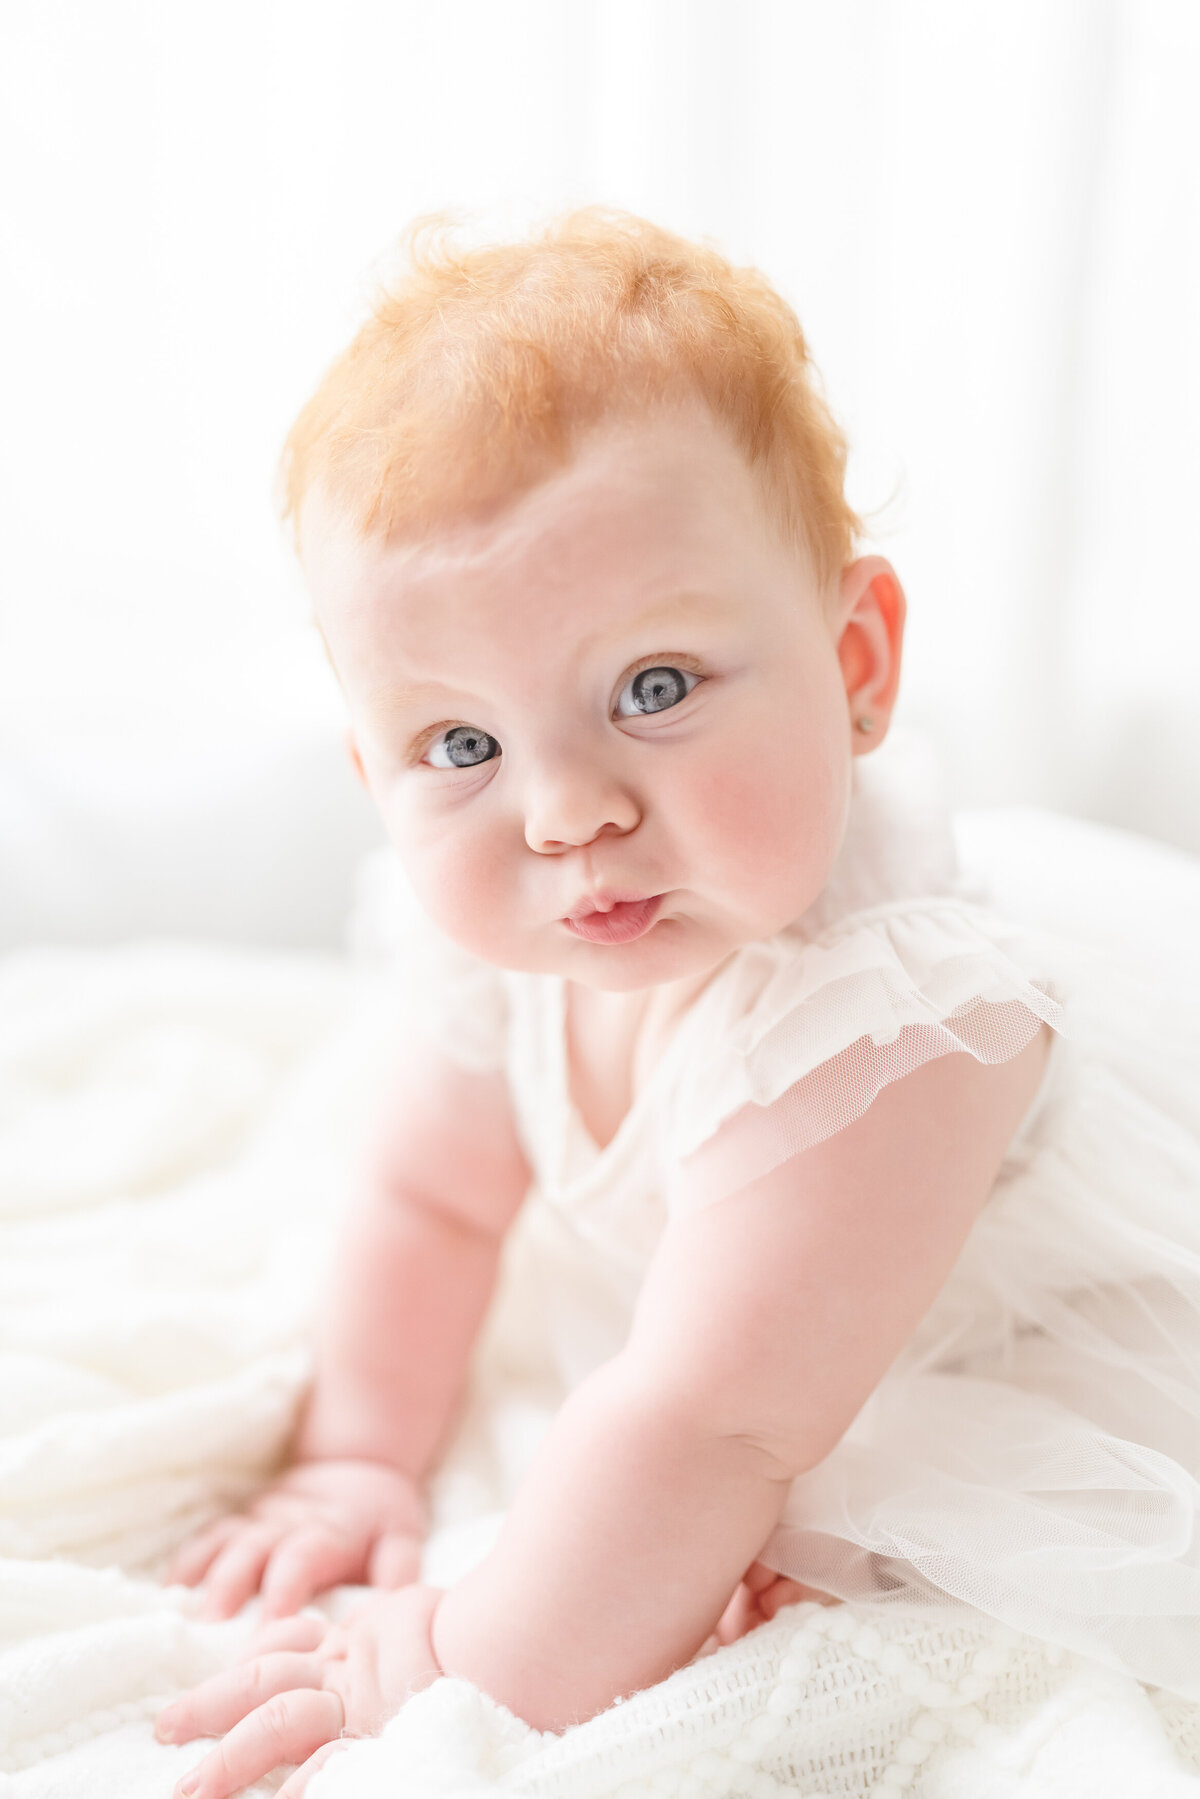 Baby and child photographer in Chandler, AZ baby girl with red hair and blue eyes looking at camera